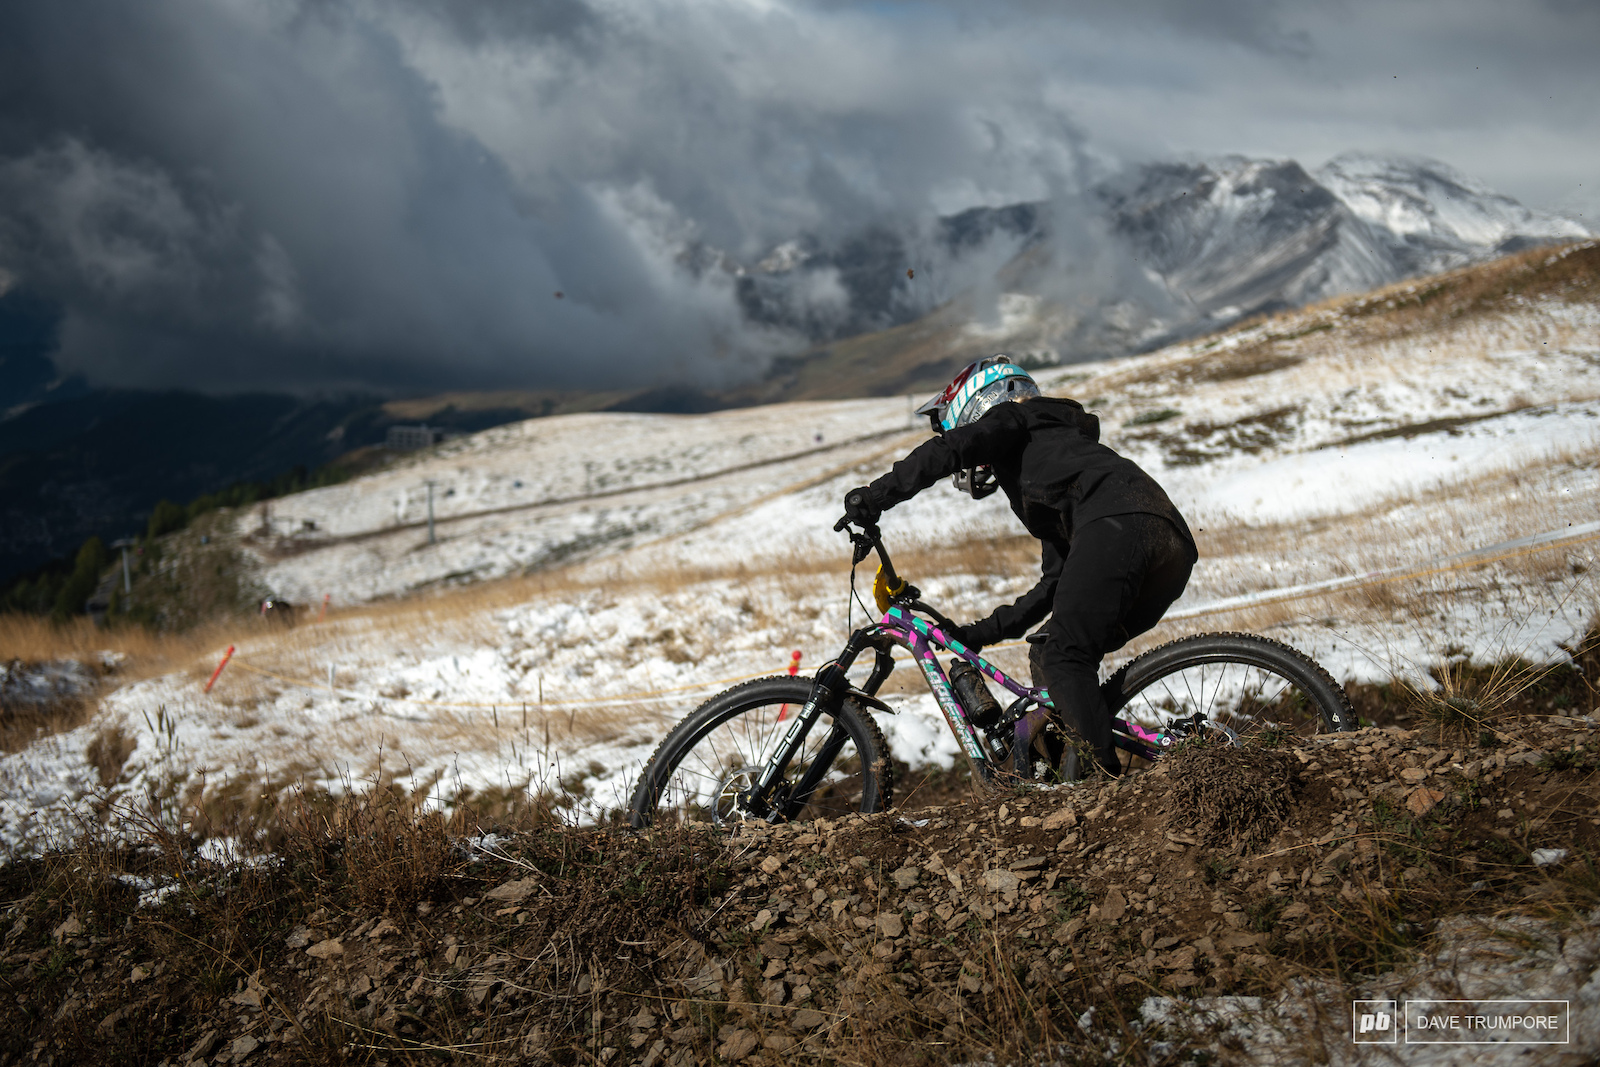 Isabeau Courdurier riding in conditions not found at her home in the south of France.